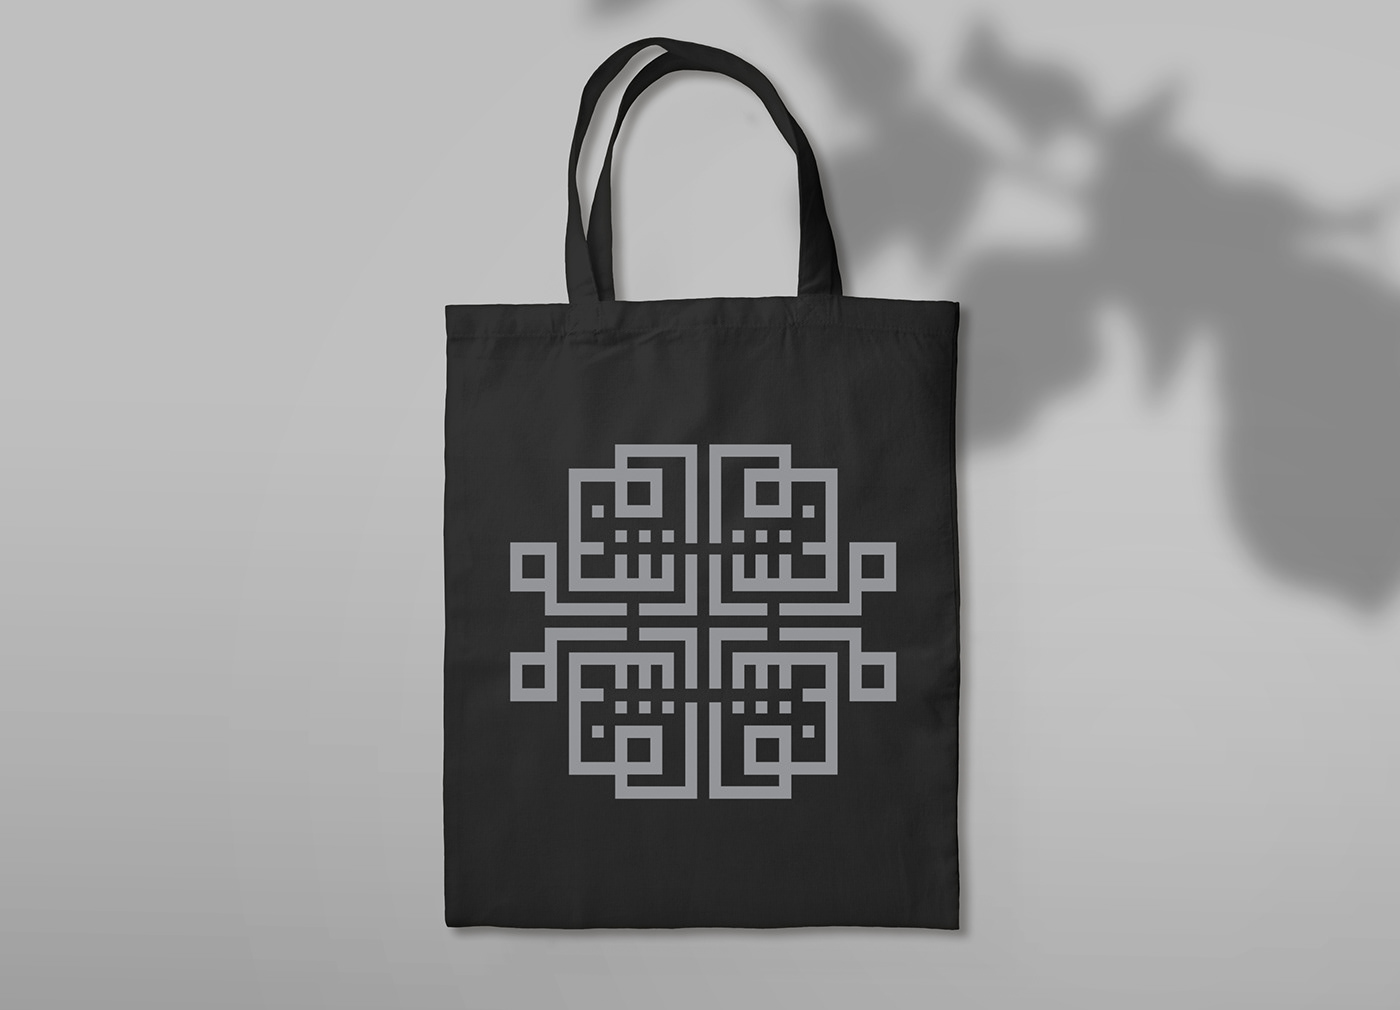 arabiclettering Arabictypography graphic deisgn SquareKufic Tote Bag TotebagDESIGN typography  